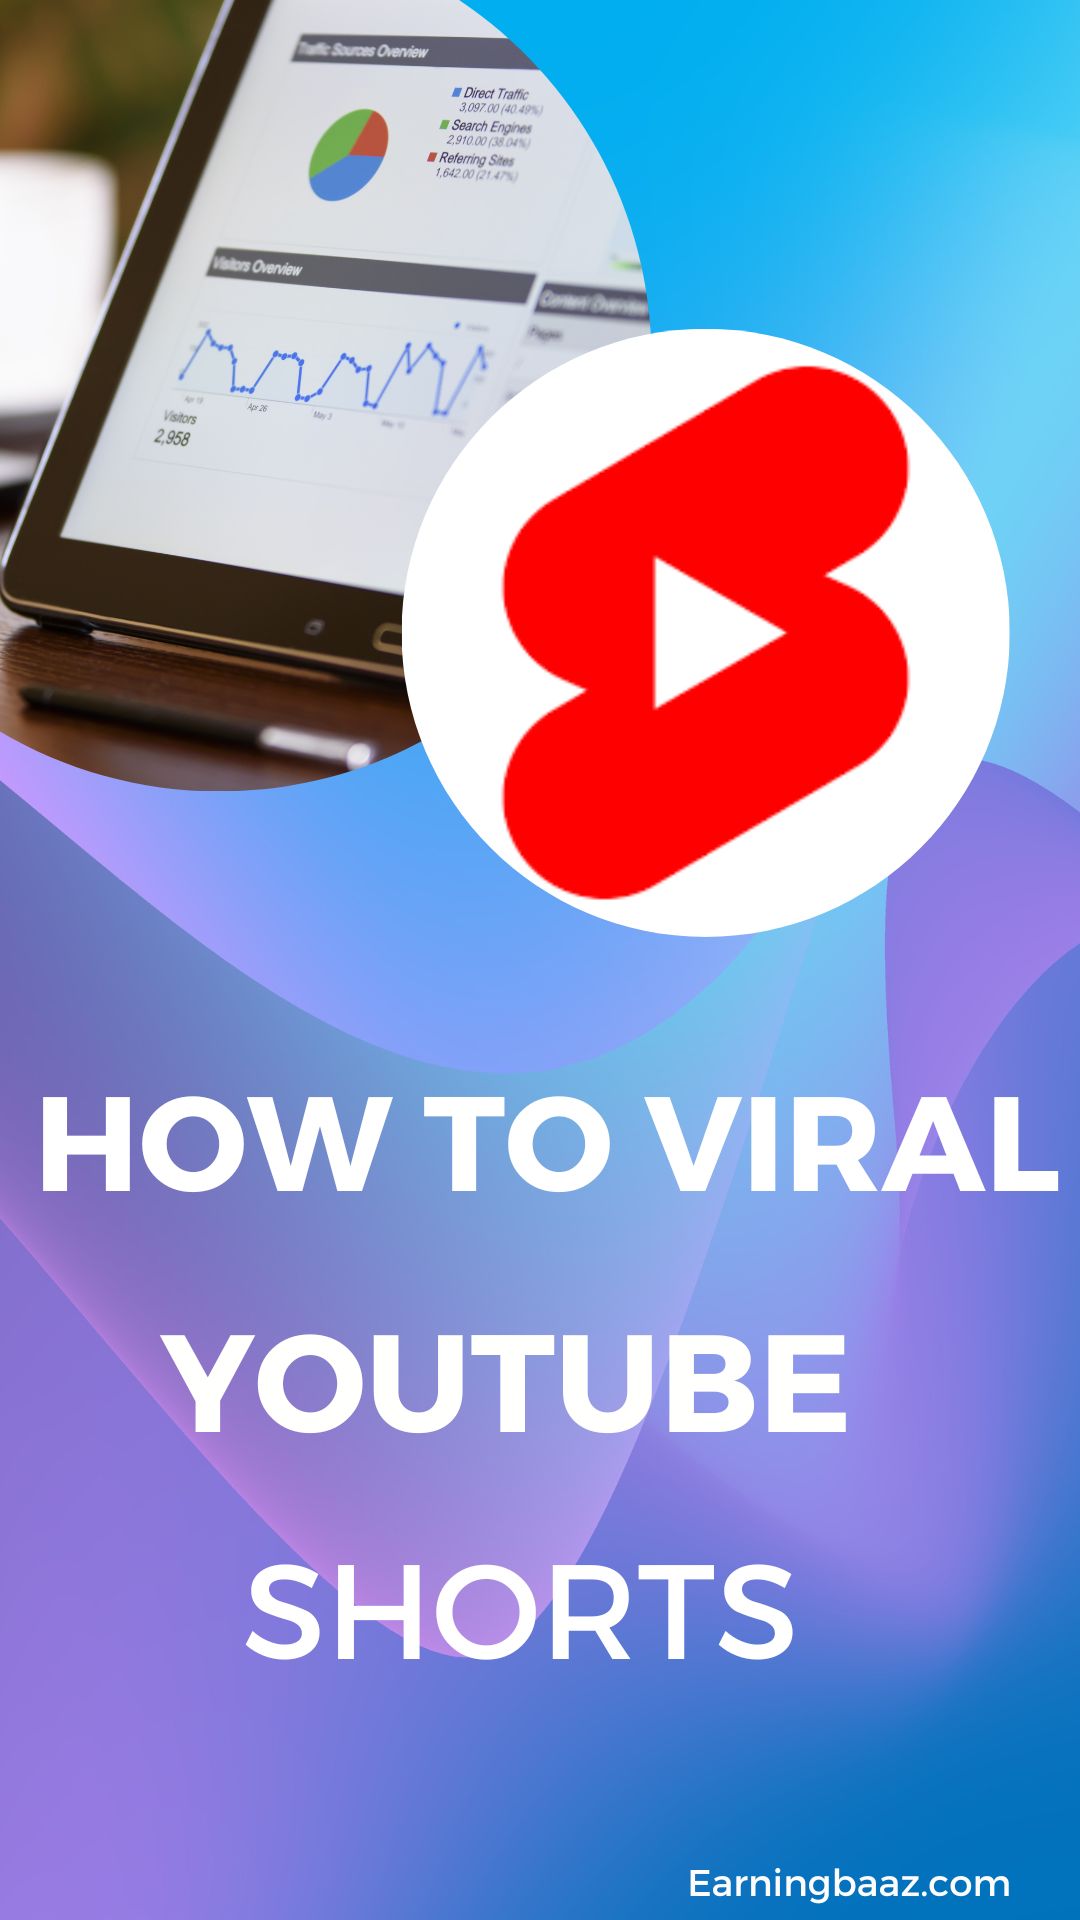 Today the most asked question is how to viral short video on YouTube? What is YouTube Short? How is it made? How does it go viral?